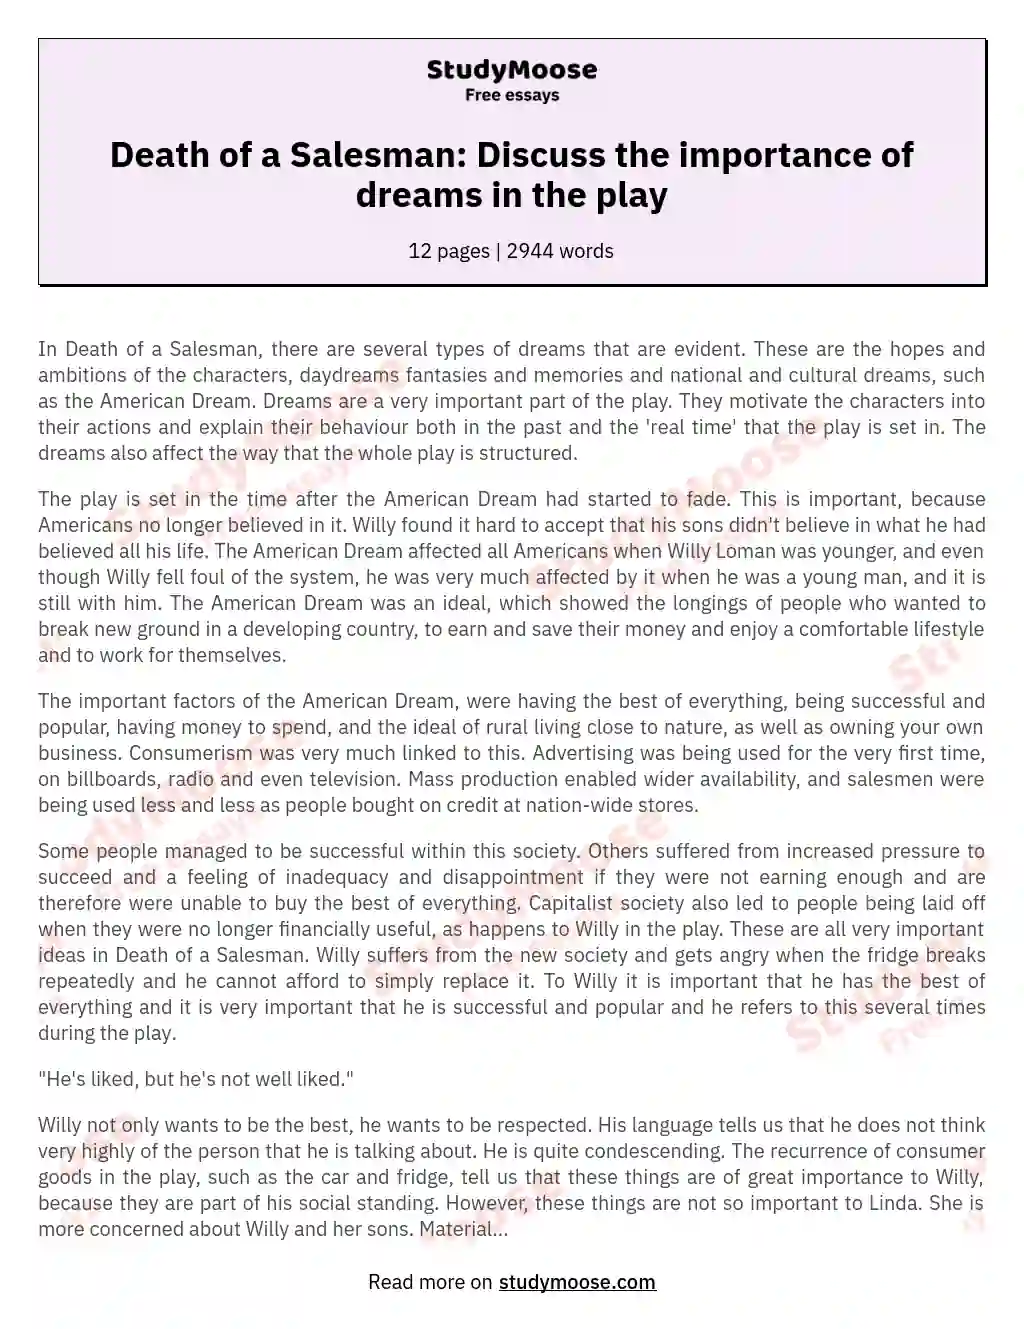 Death of a Salesman: Discuss the importance of dreams in the play essay